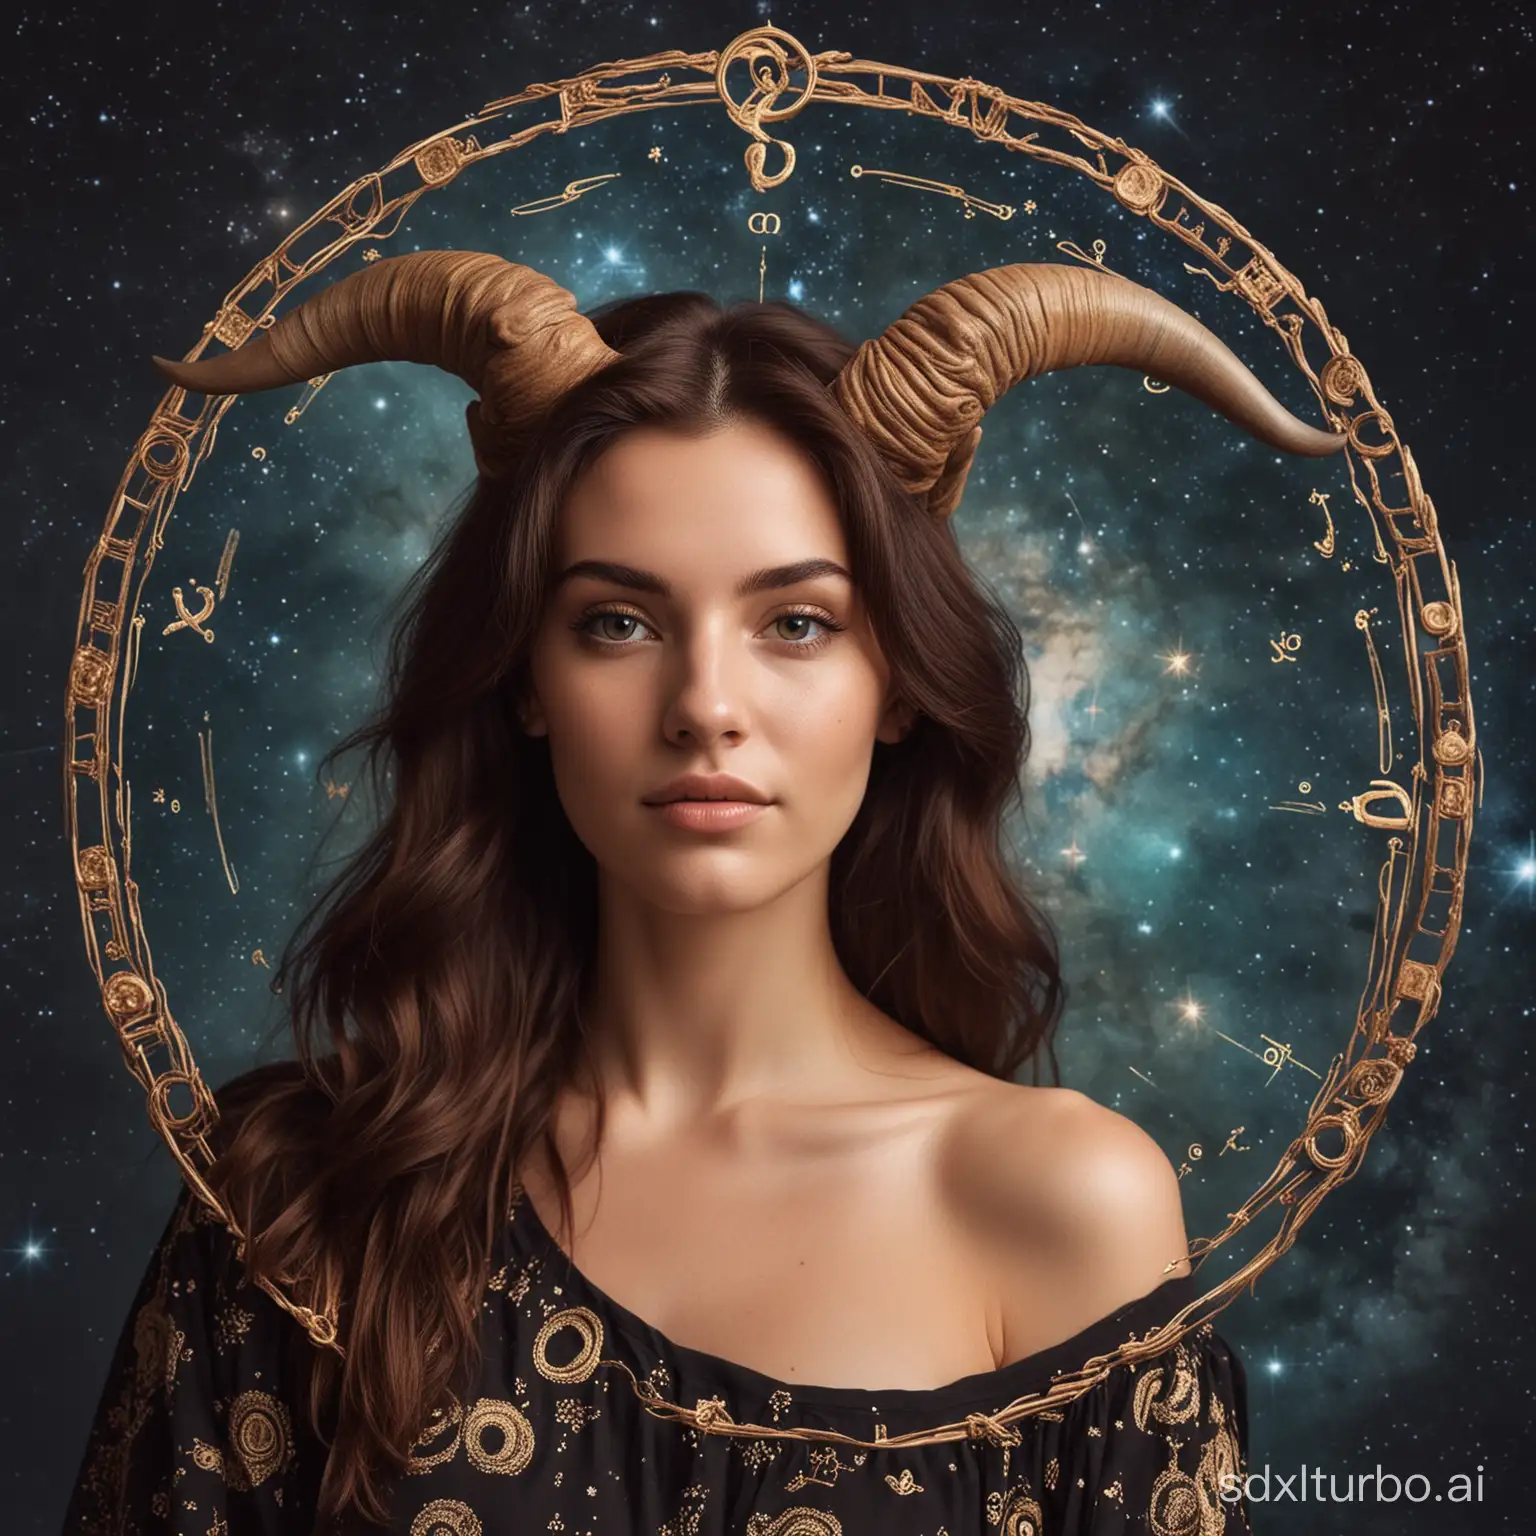 Portrait-of-a-Taurus-Woman-Capturing-Earthy-Strength-and-Sensuality